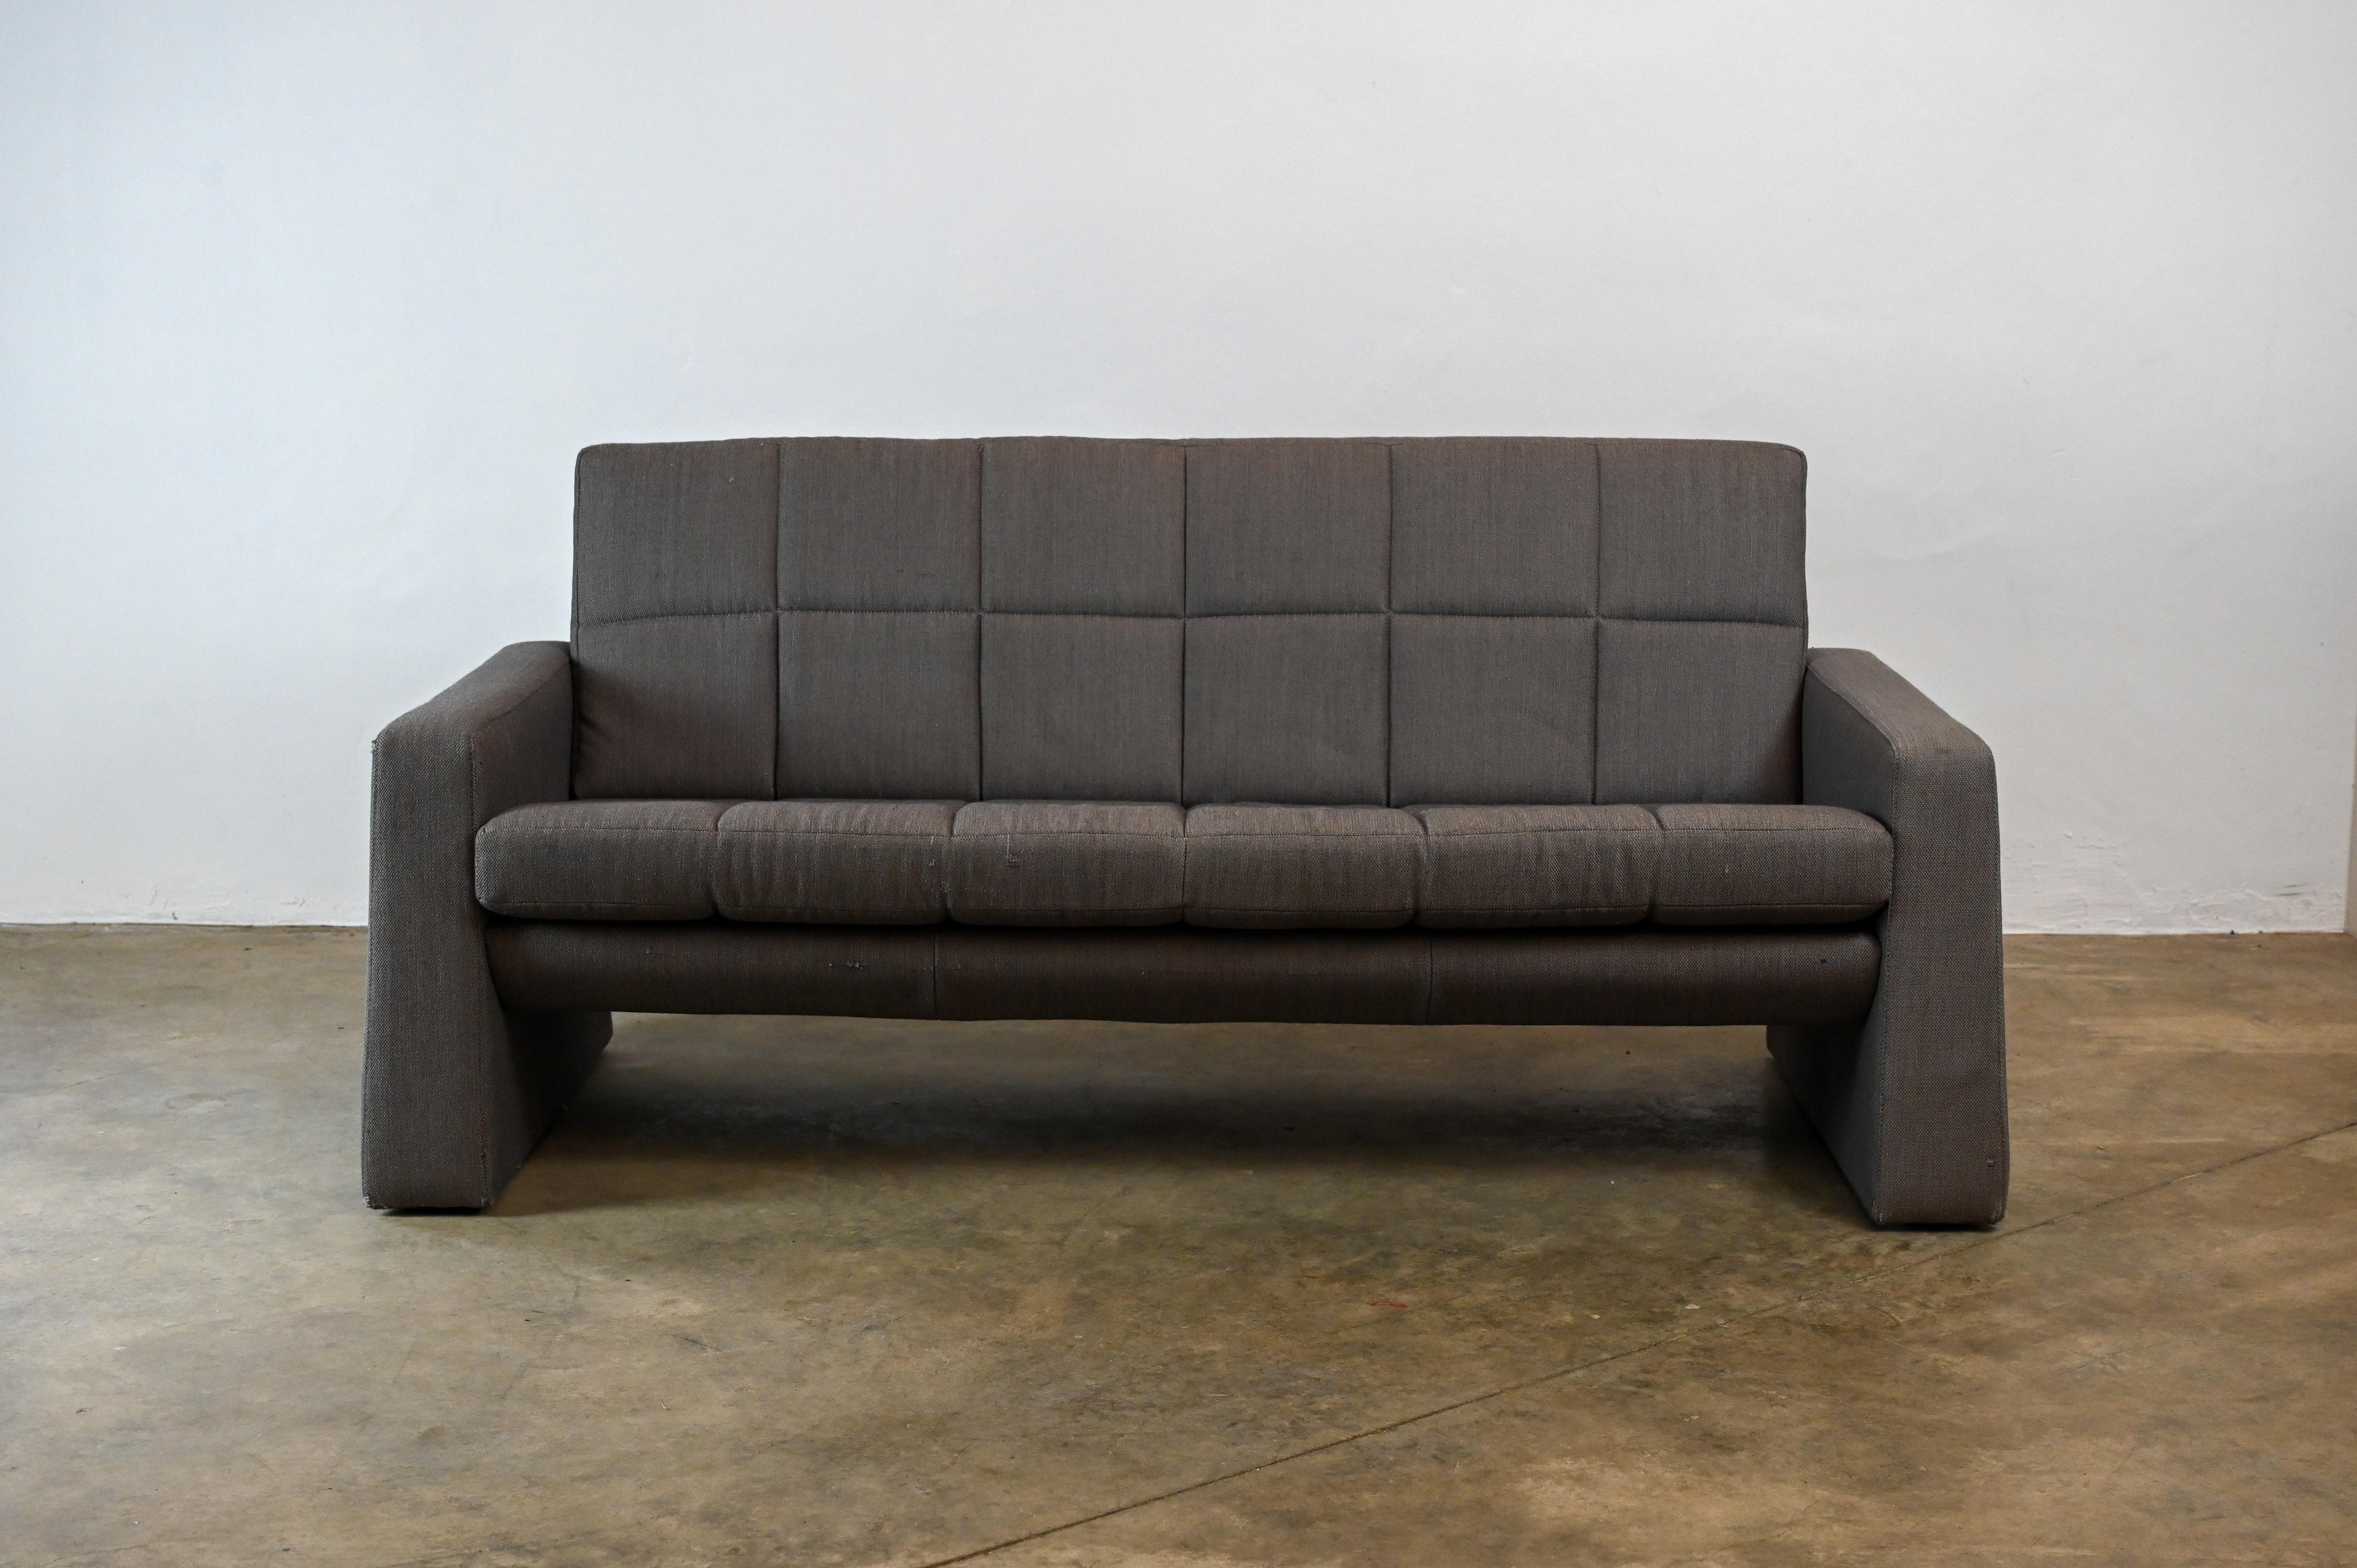 very nice sofa with a good design from the Netherlands. The middle part seems to be floating. Tag on the bottom leg and also on the back of the pillow.